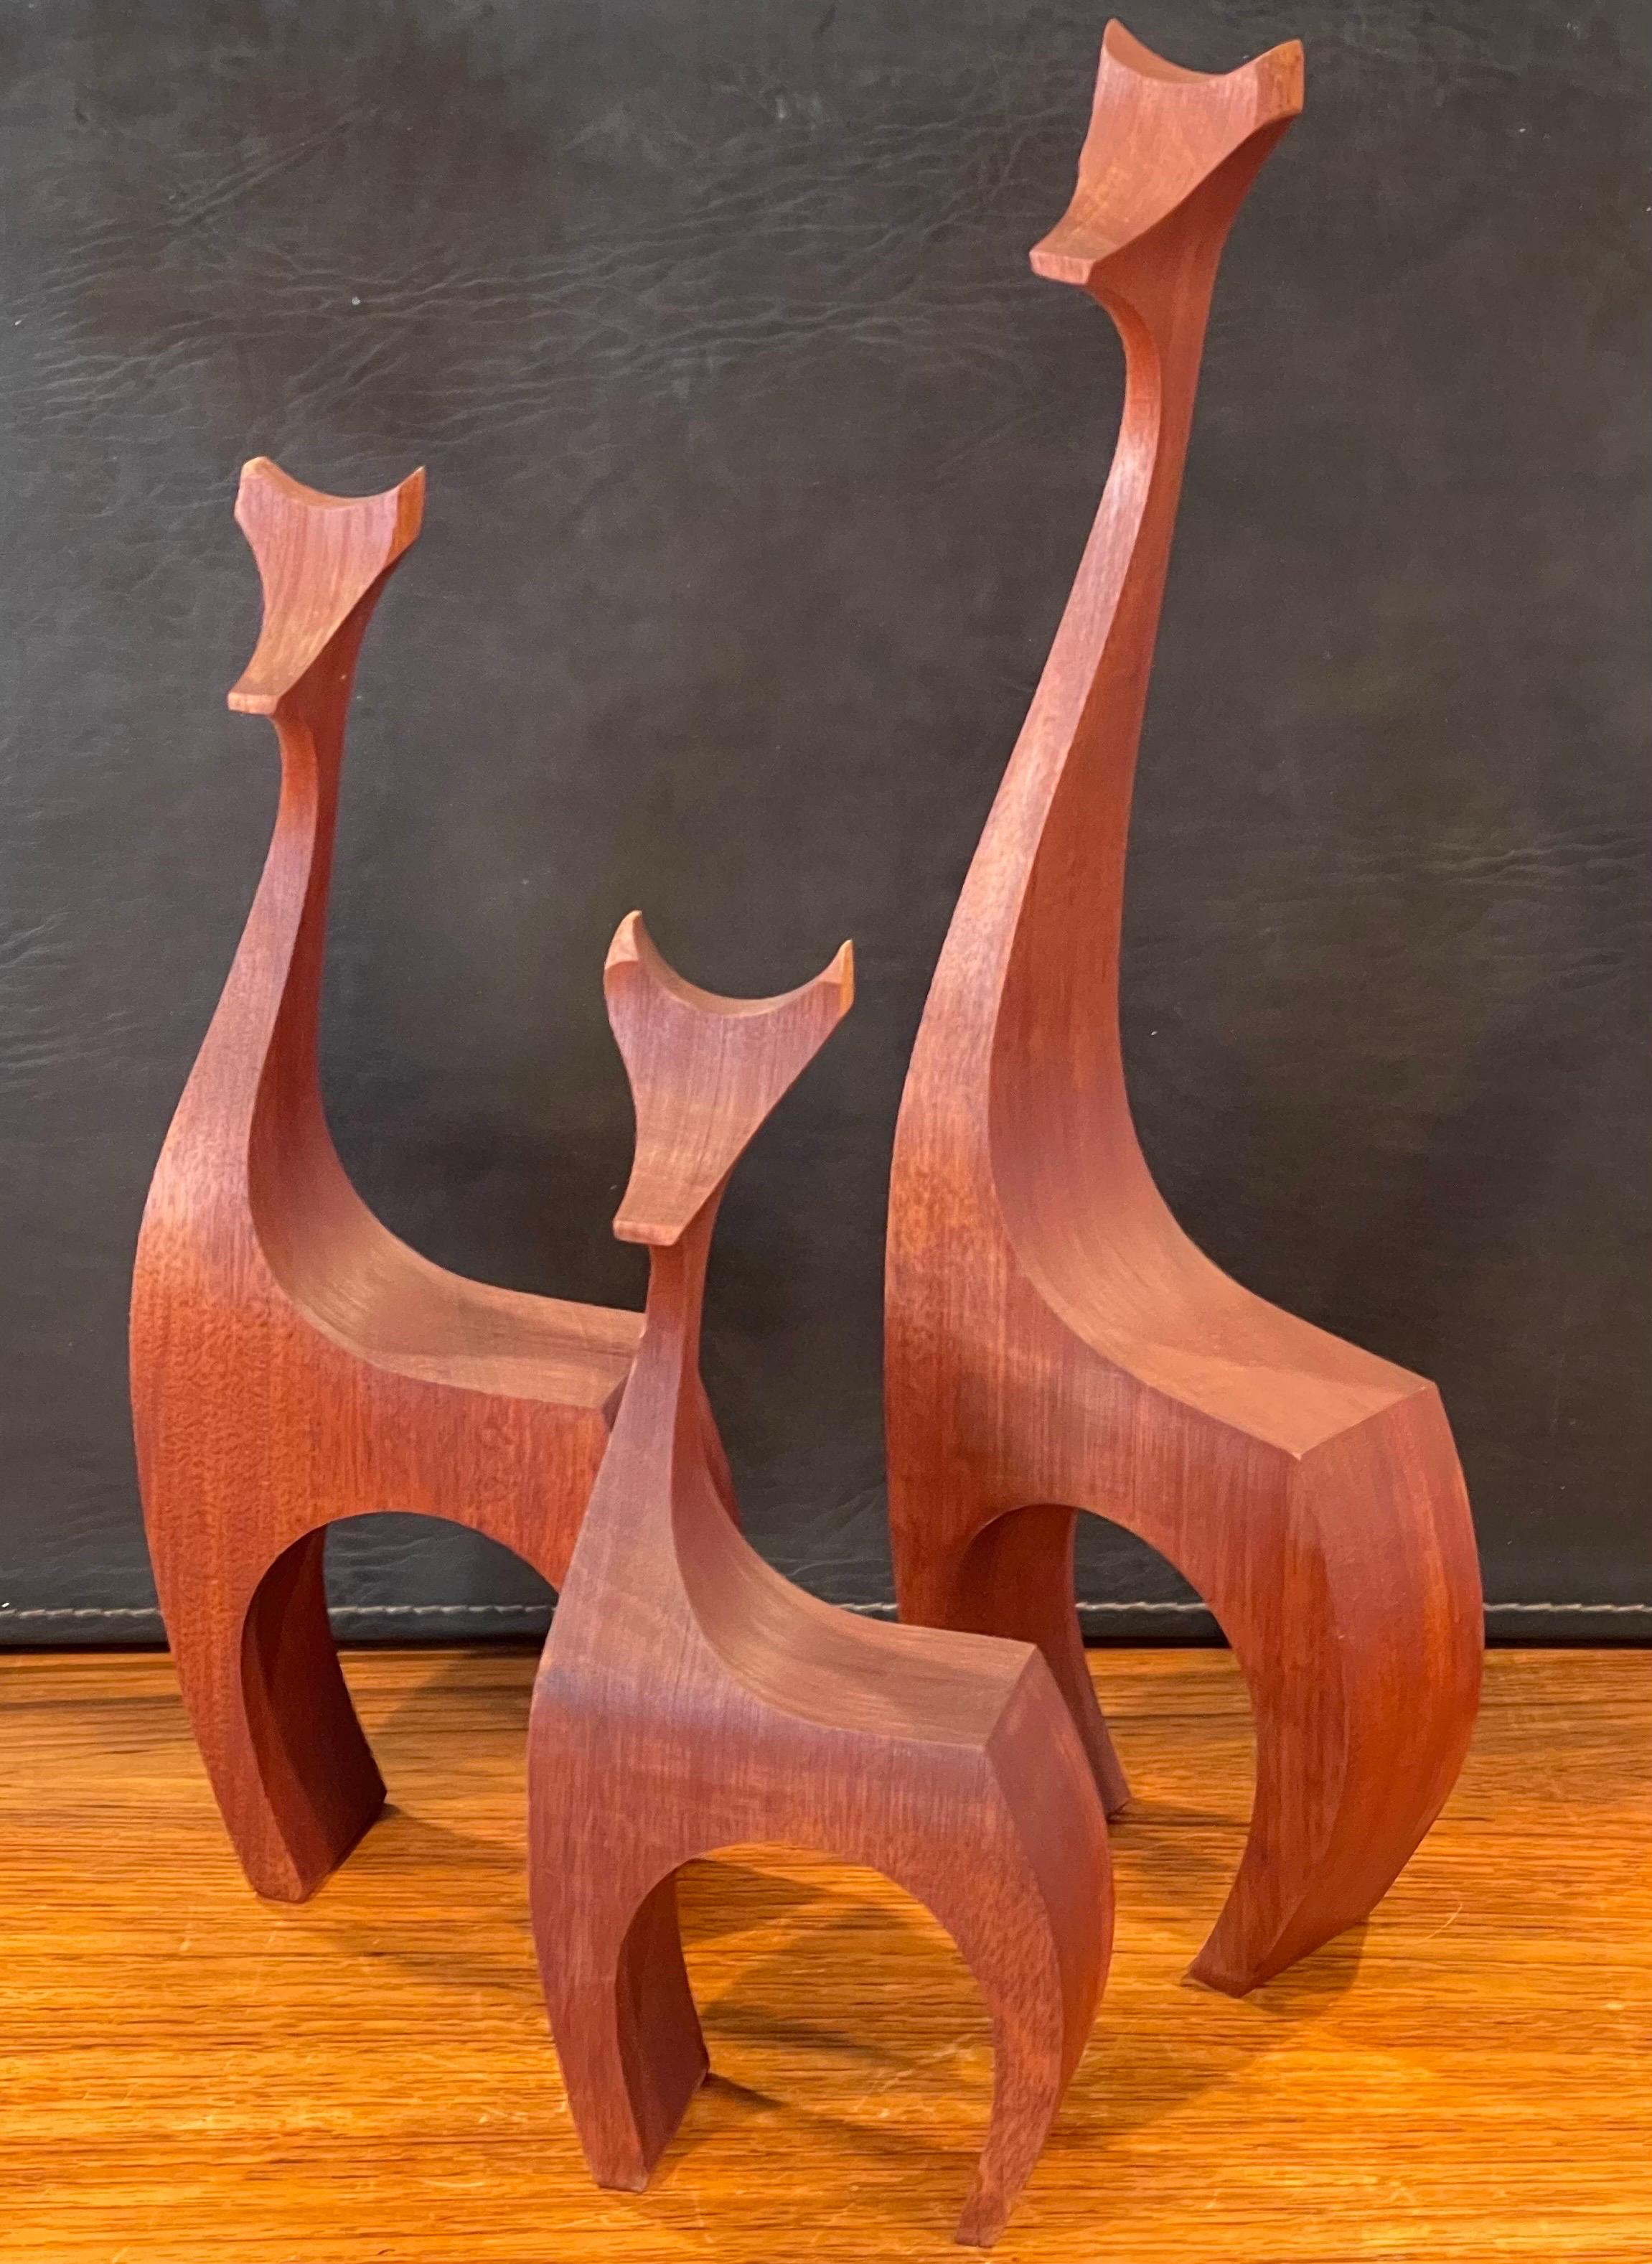 American Set of Three Modernist Giraffe Wood Sculptures by Del Zotto Studios For Sale